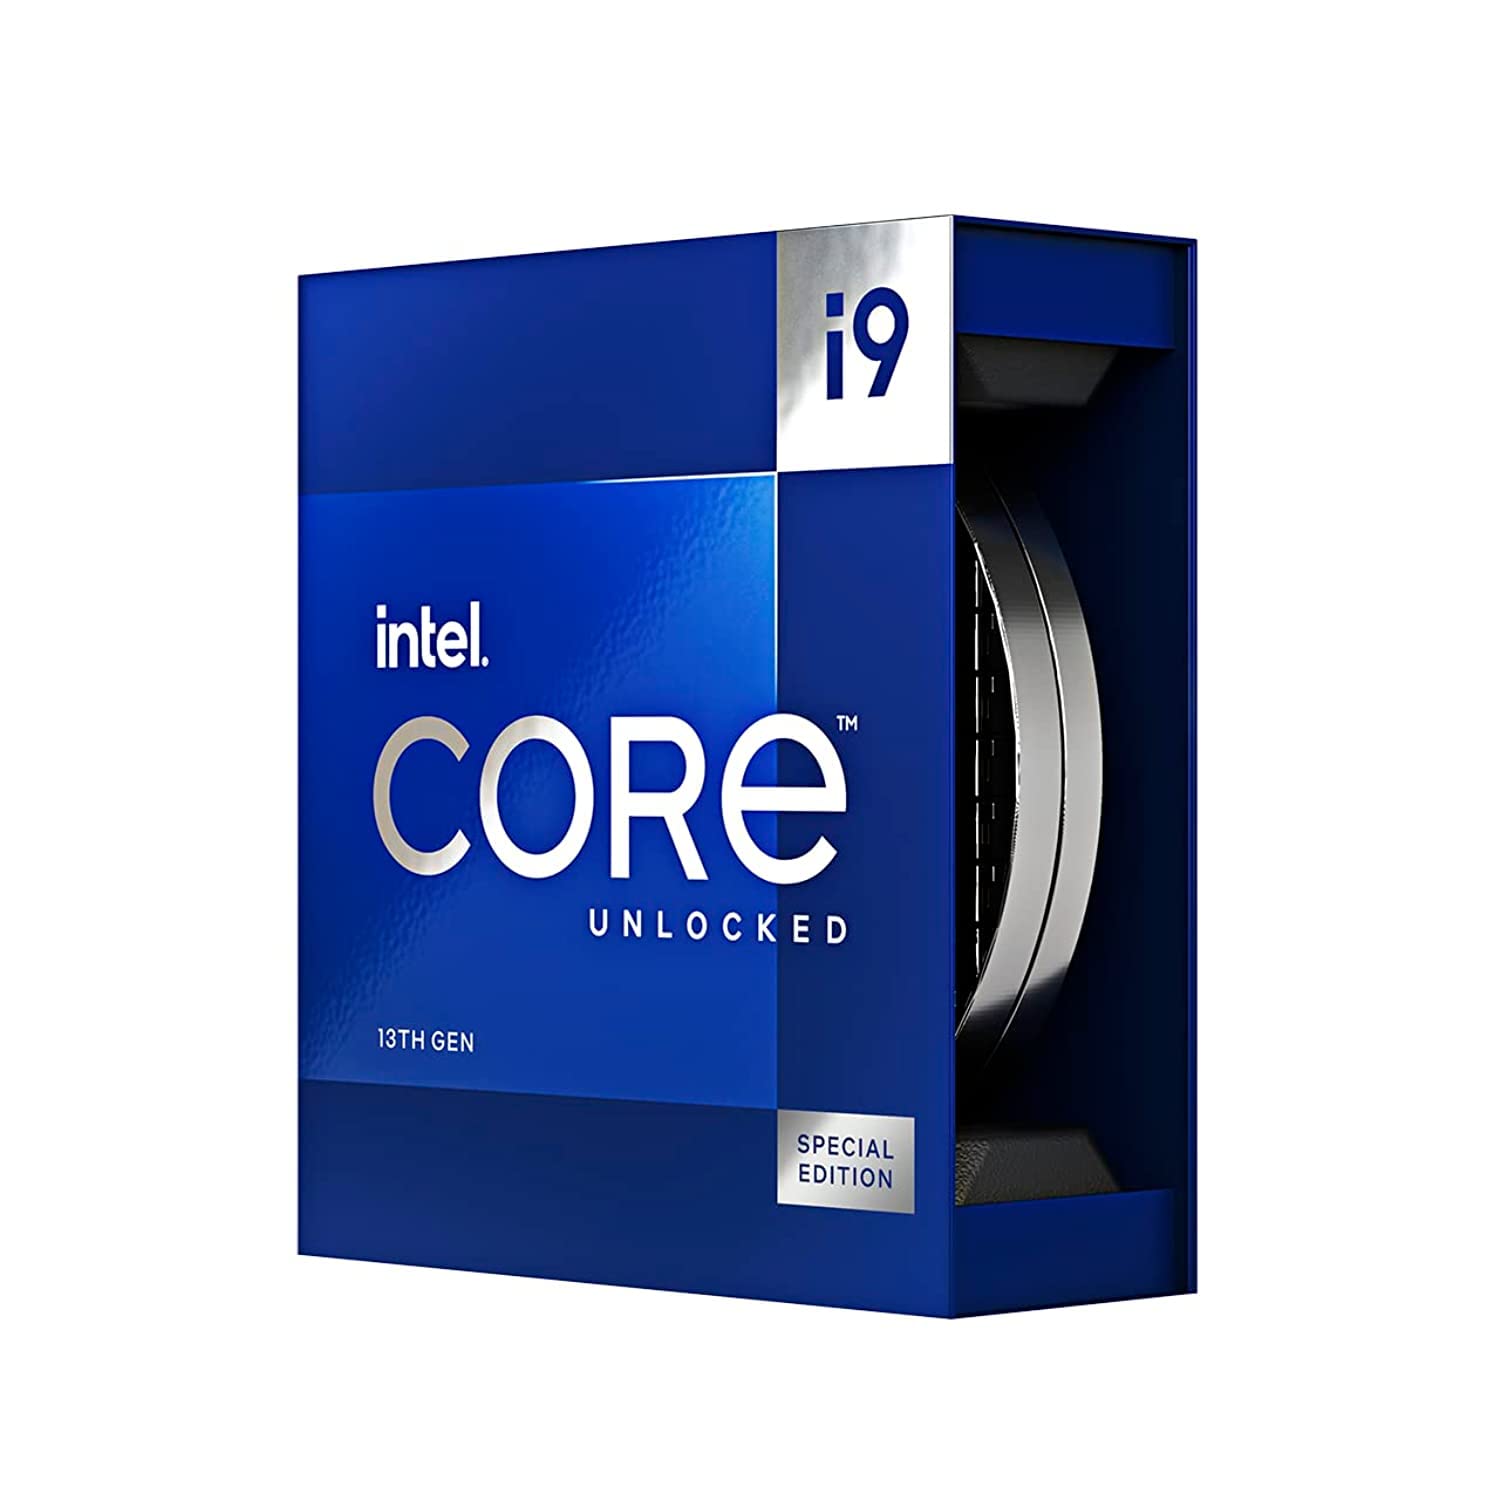 Intel Core i9-13900KS 13th Generation Processor with 6.00 GHz Base Frequency, 32 Total Threads, and Intel UHD Graphics 770